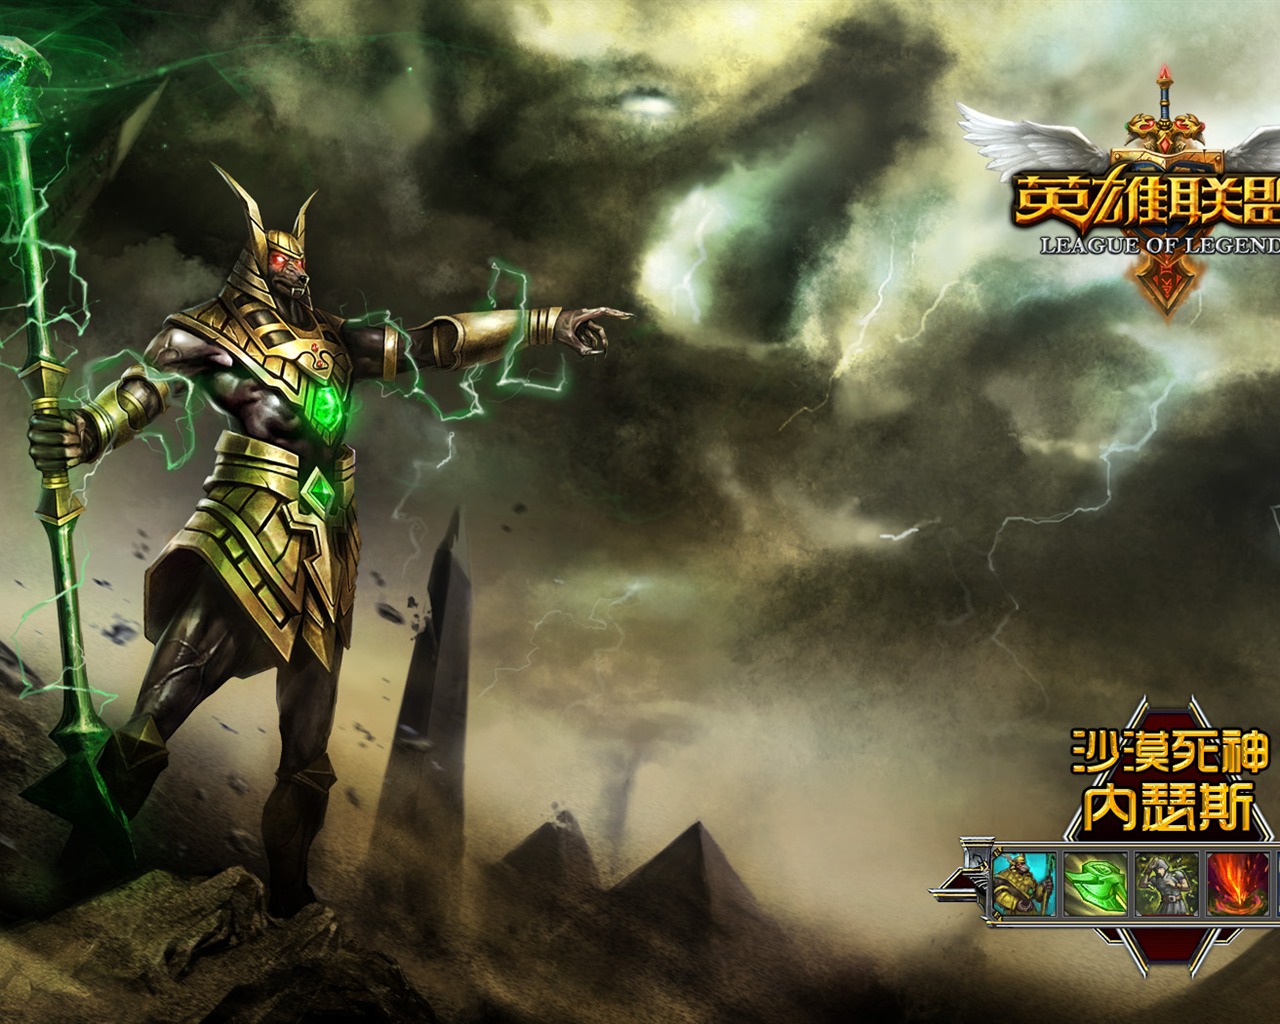 League of Legends Thema Tapete #9 - 1280x1024